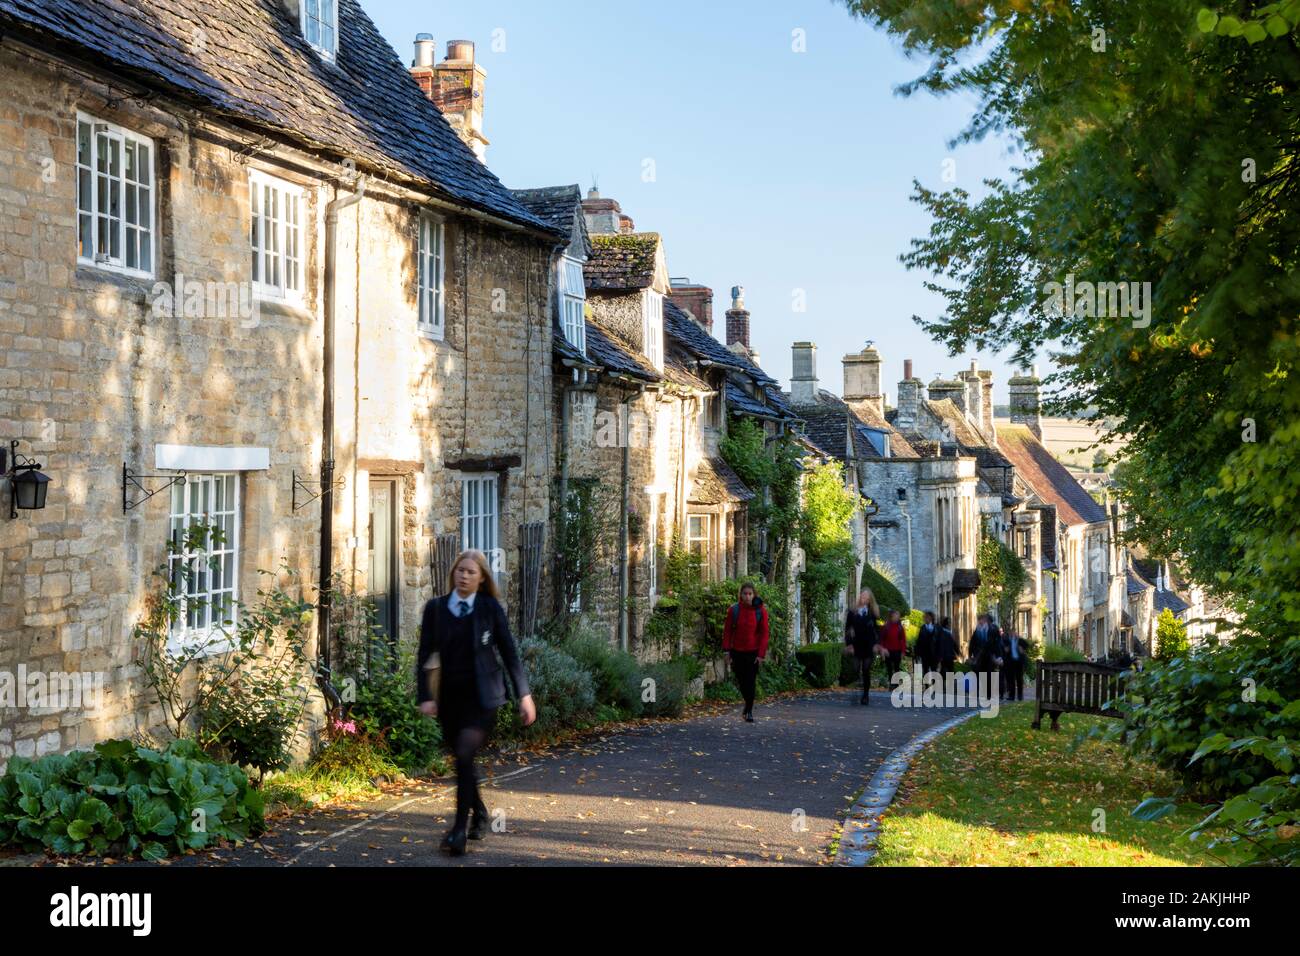 School children walking up The Hill to school past rows of homes in Burford, Oxfordshire, England, UK Stock Photo